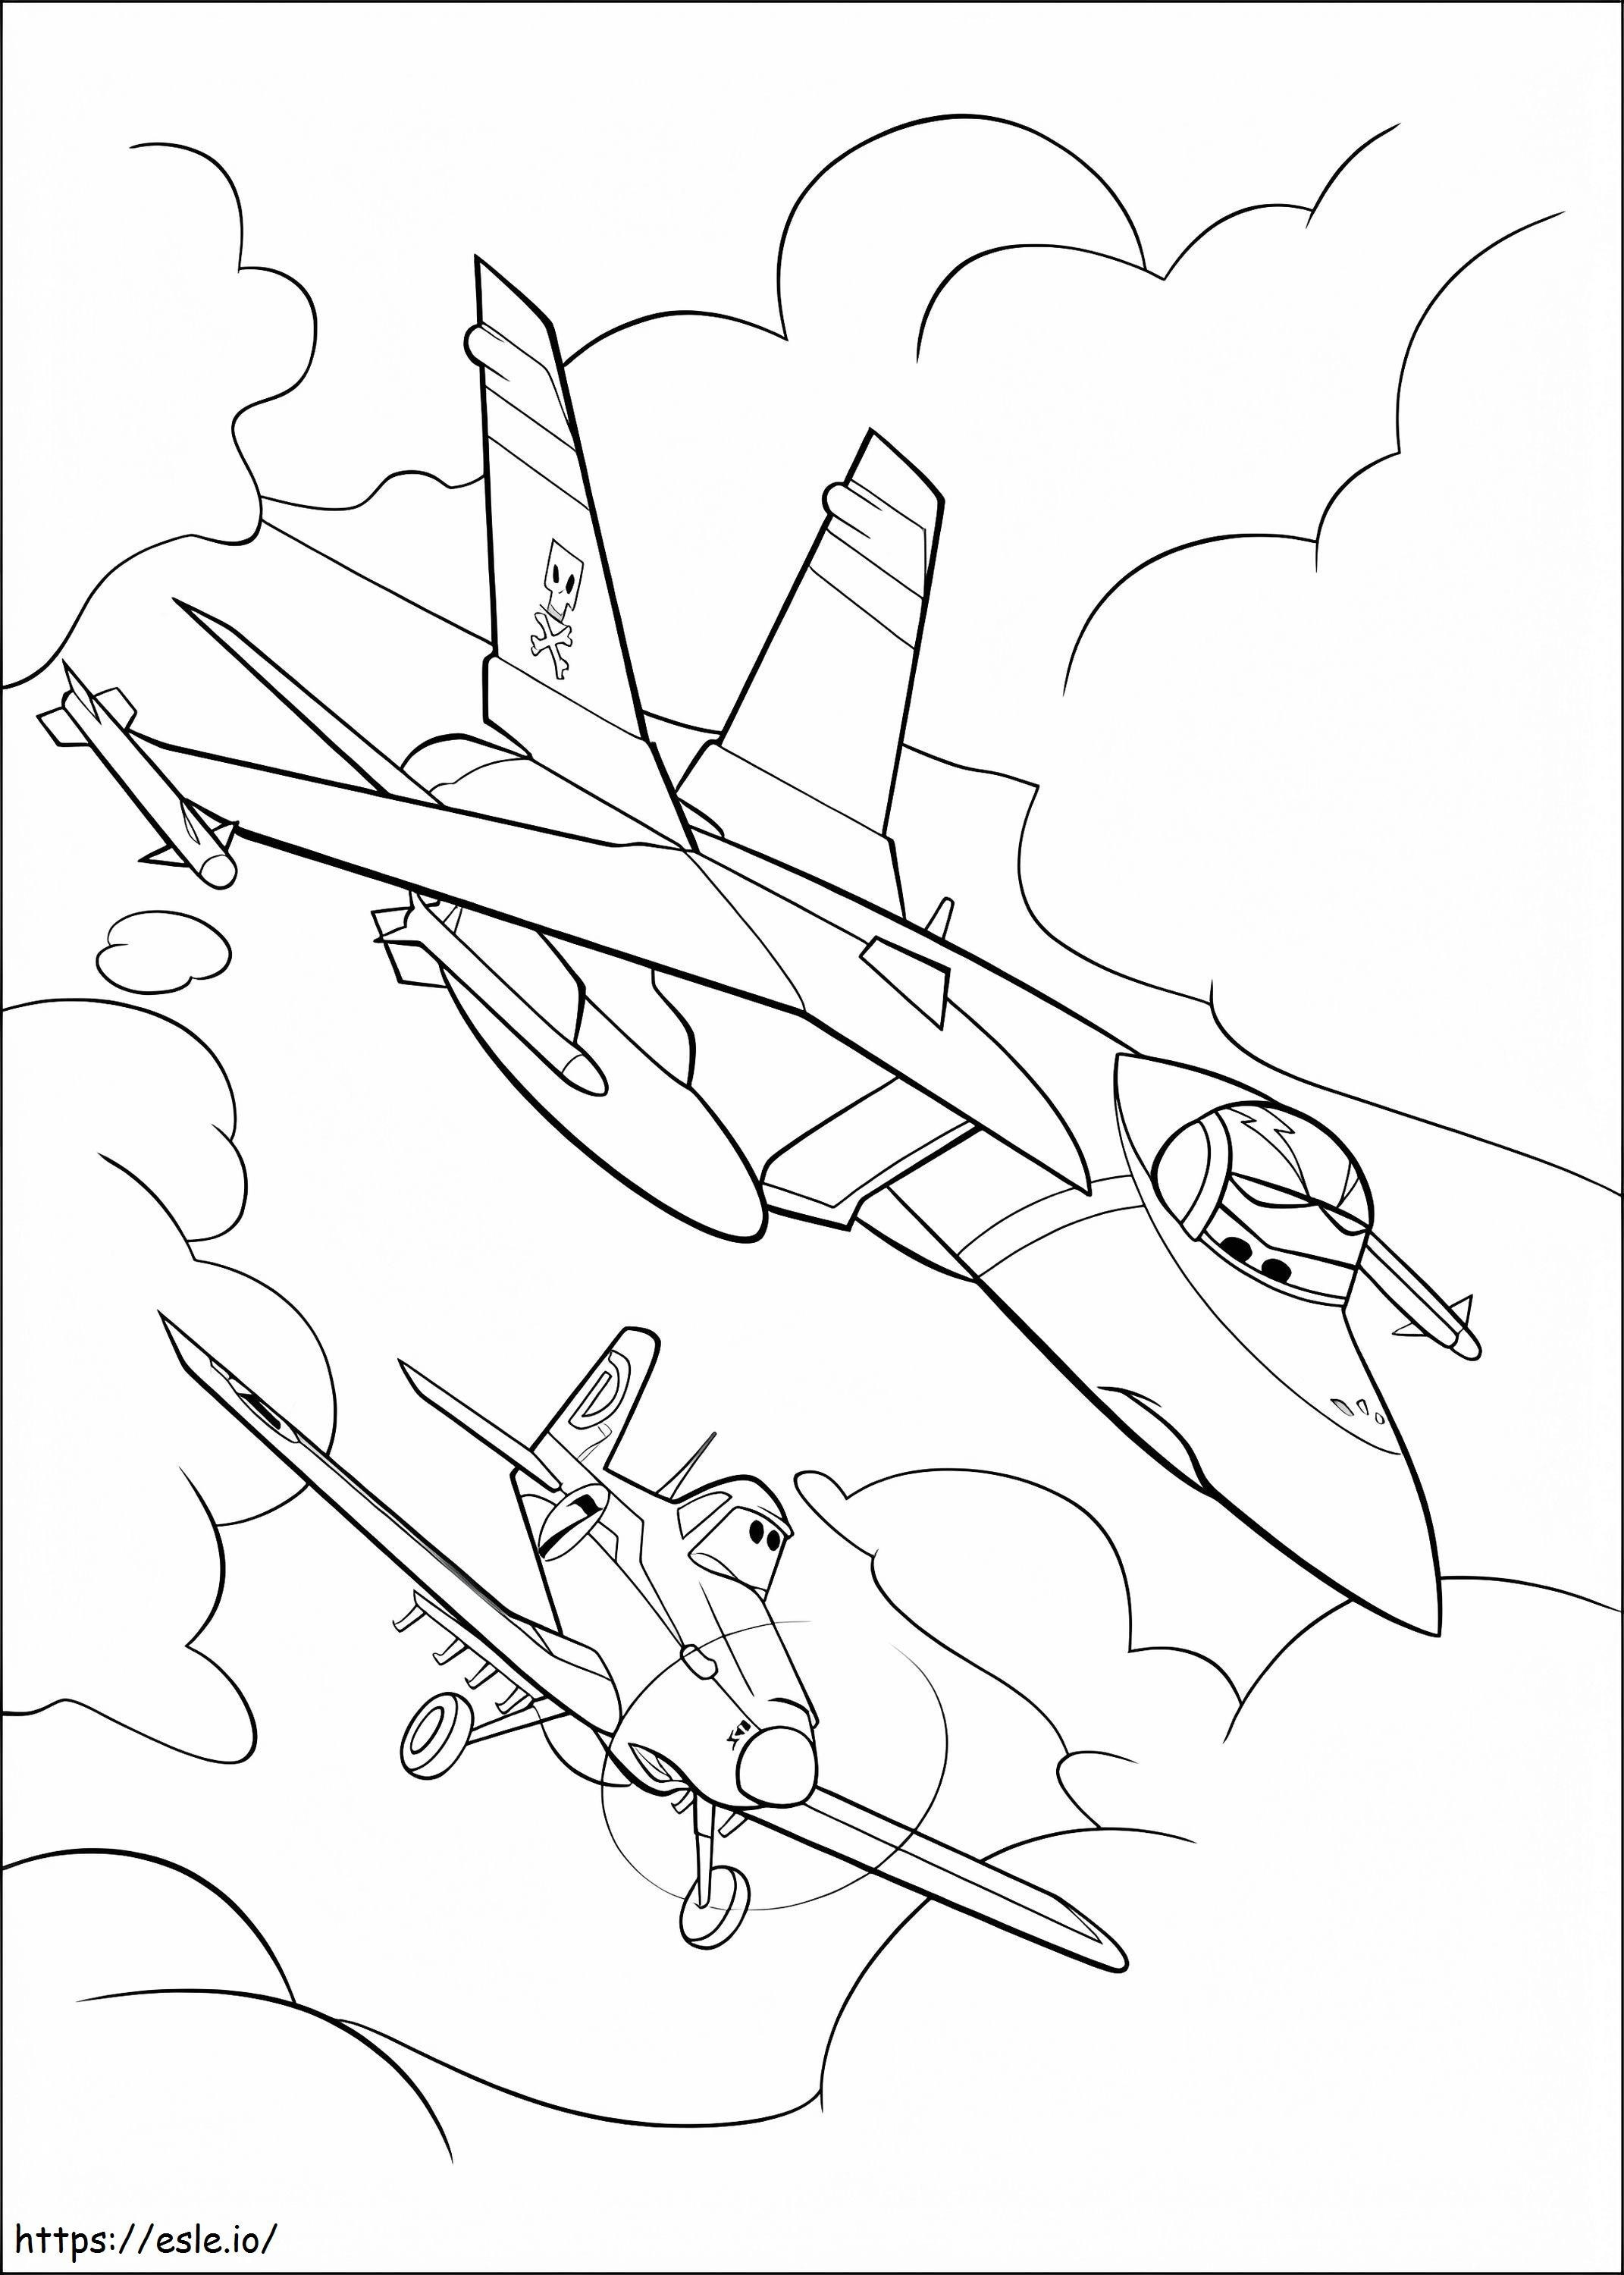 Two Basic Disney Planes coloring page